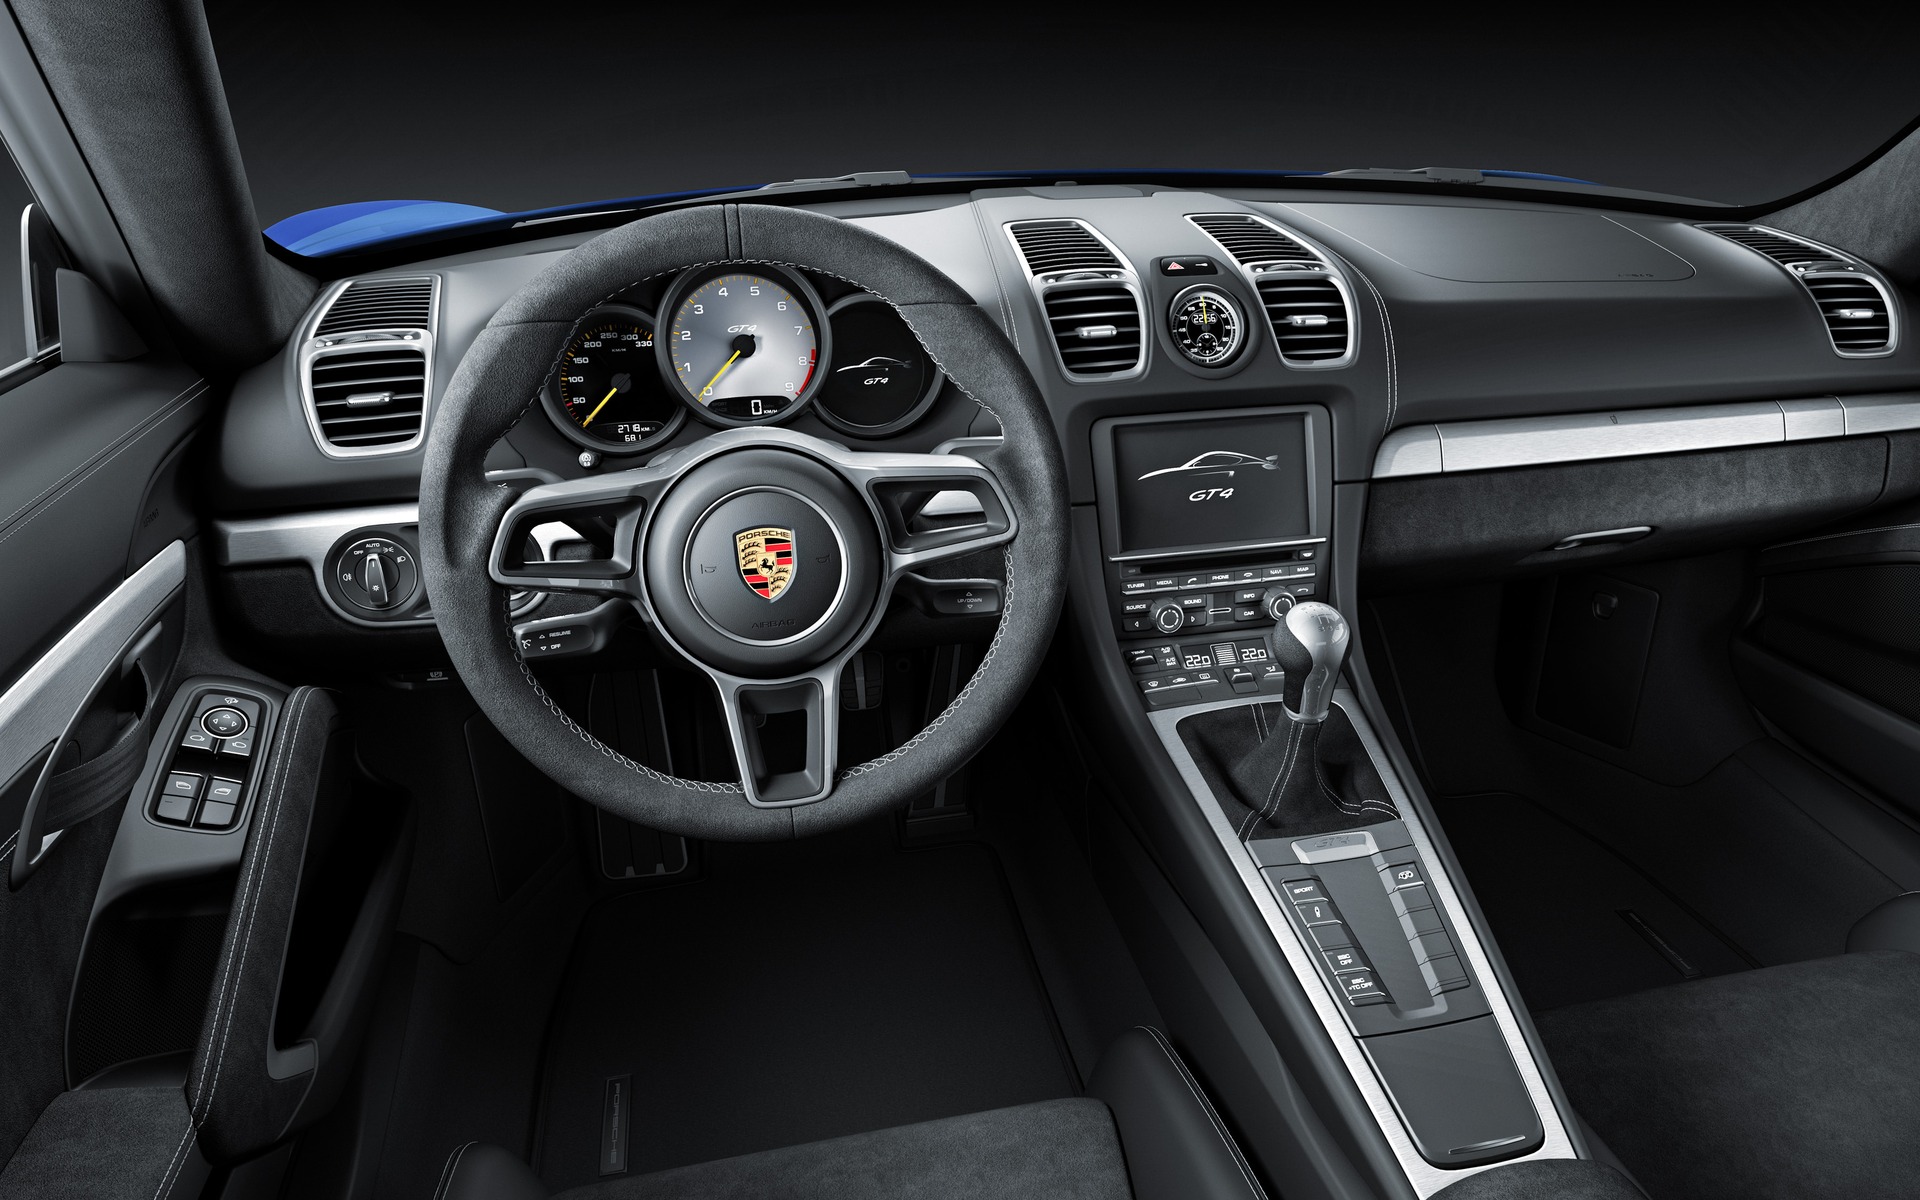 The GT4’s interior is both luxurious and pragmatic.